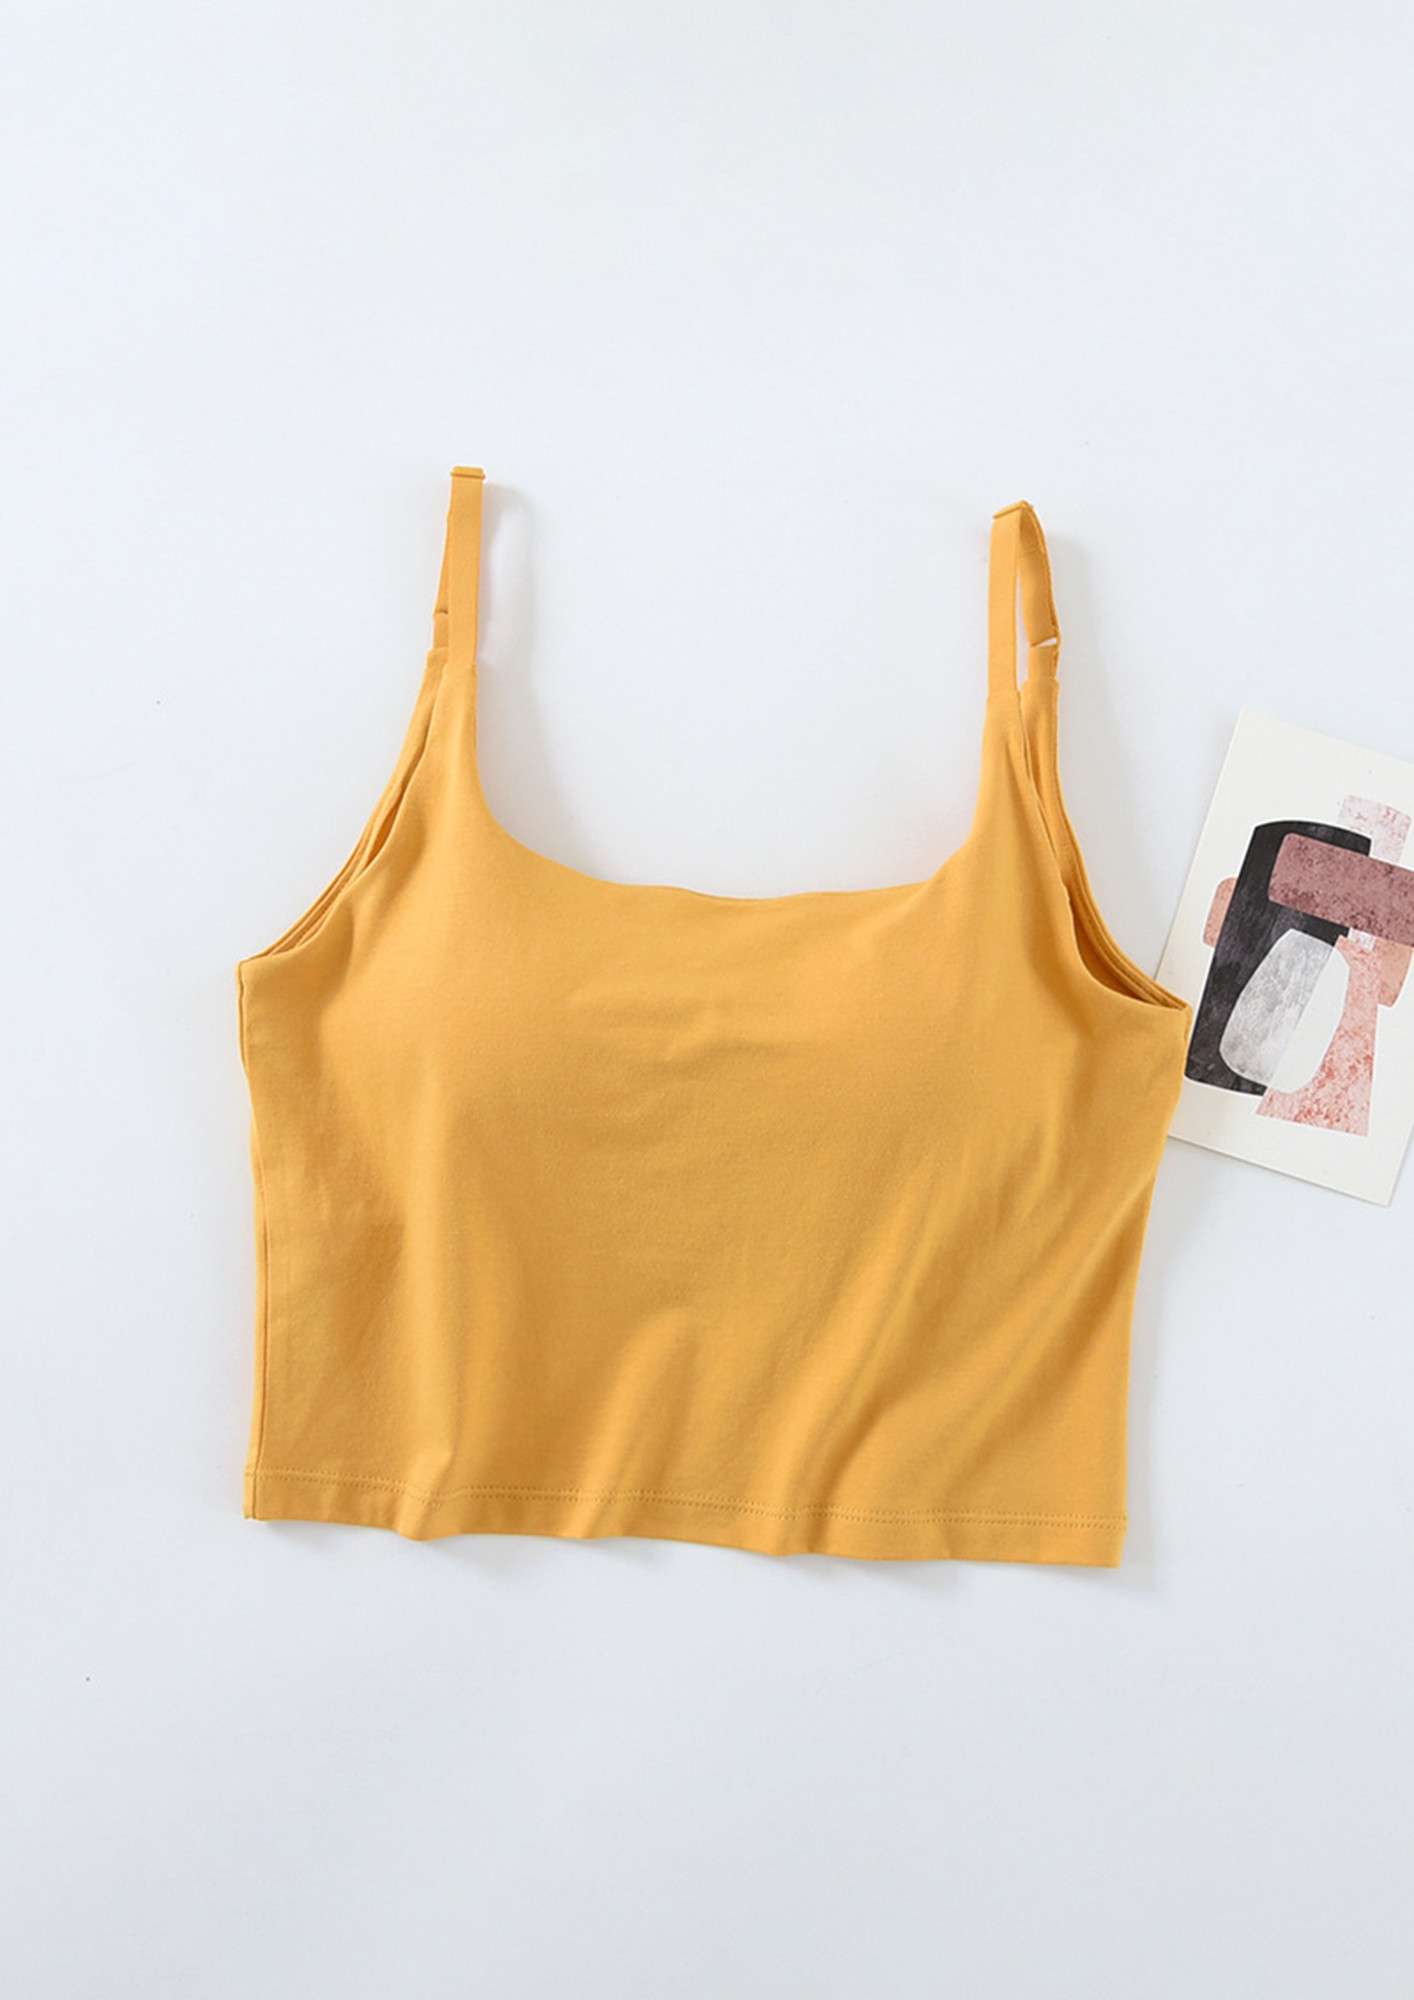 OH SO BASIC YELLOW TOP